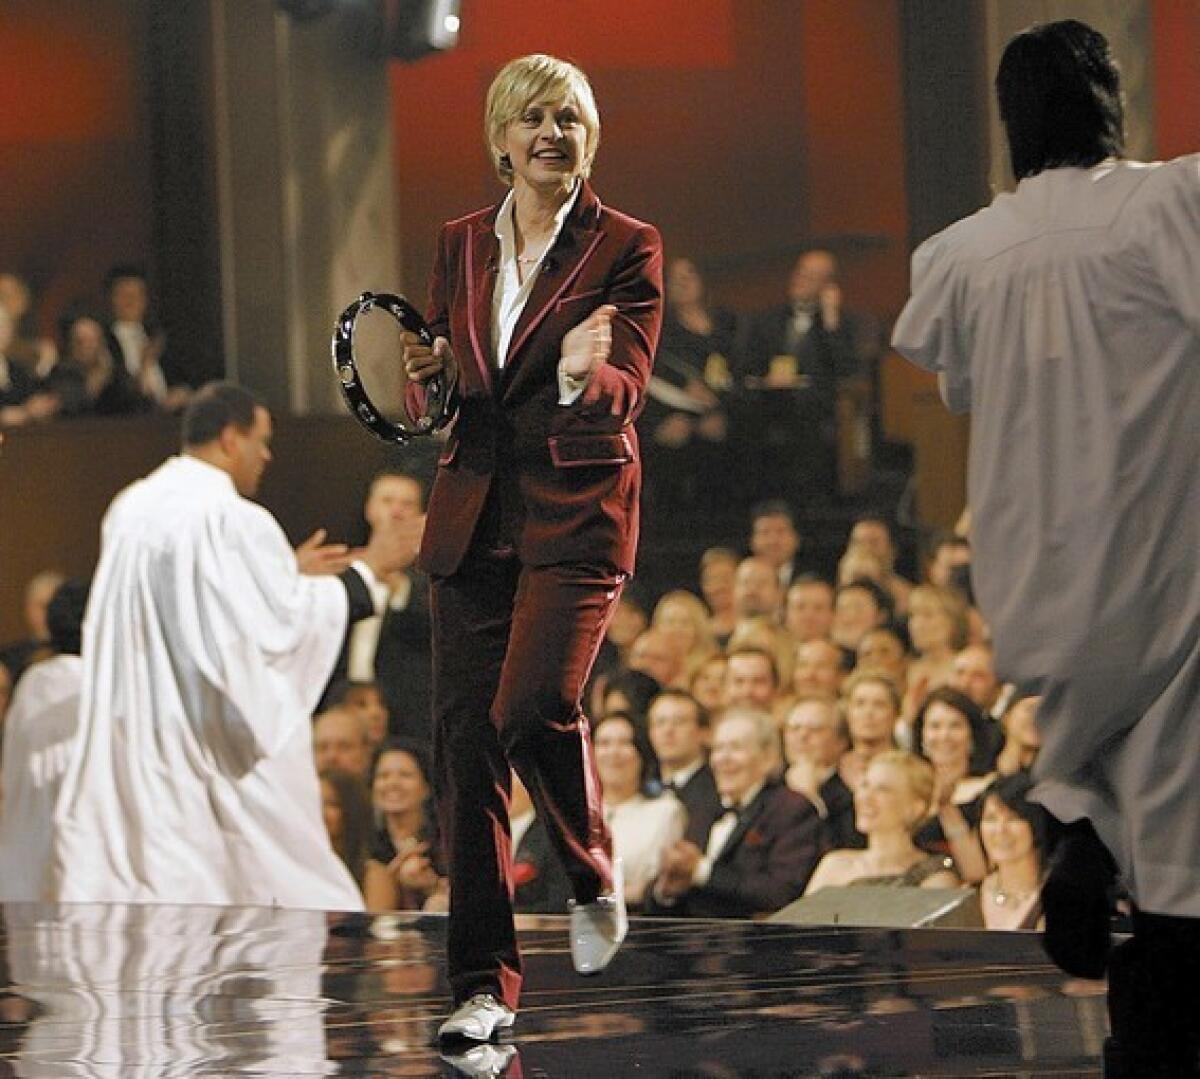 Ellen DeGeneres injected some energy into the Oscars when last she hosted in 2007. She might be a good candidate for a more steady hosting gig.